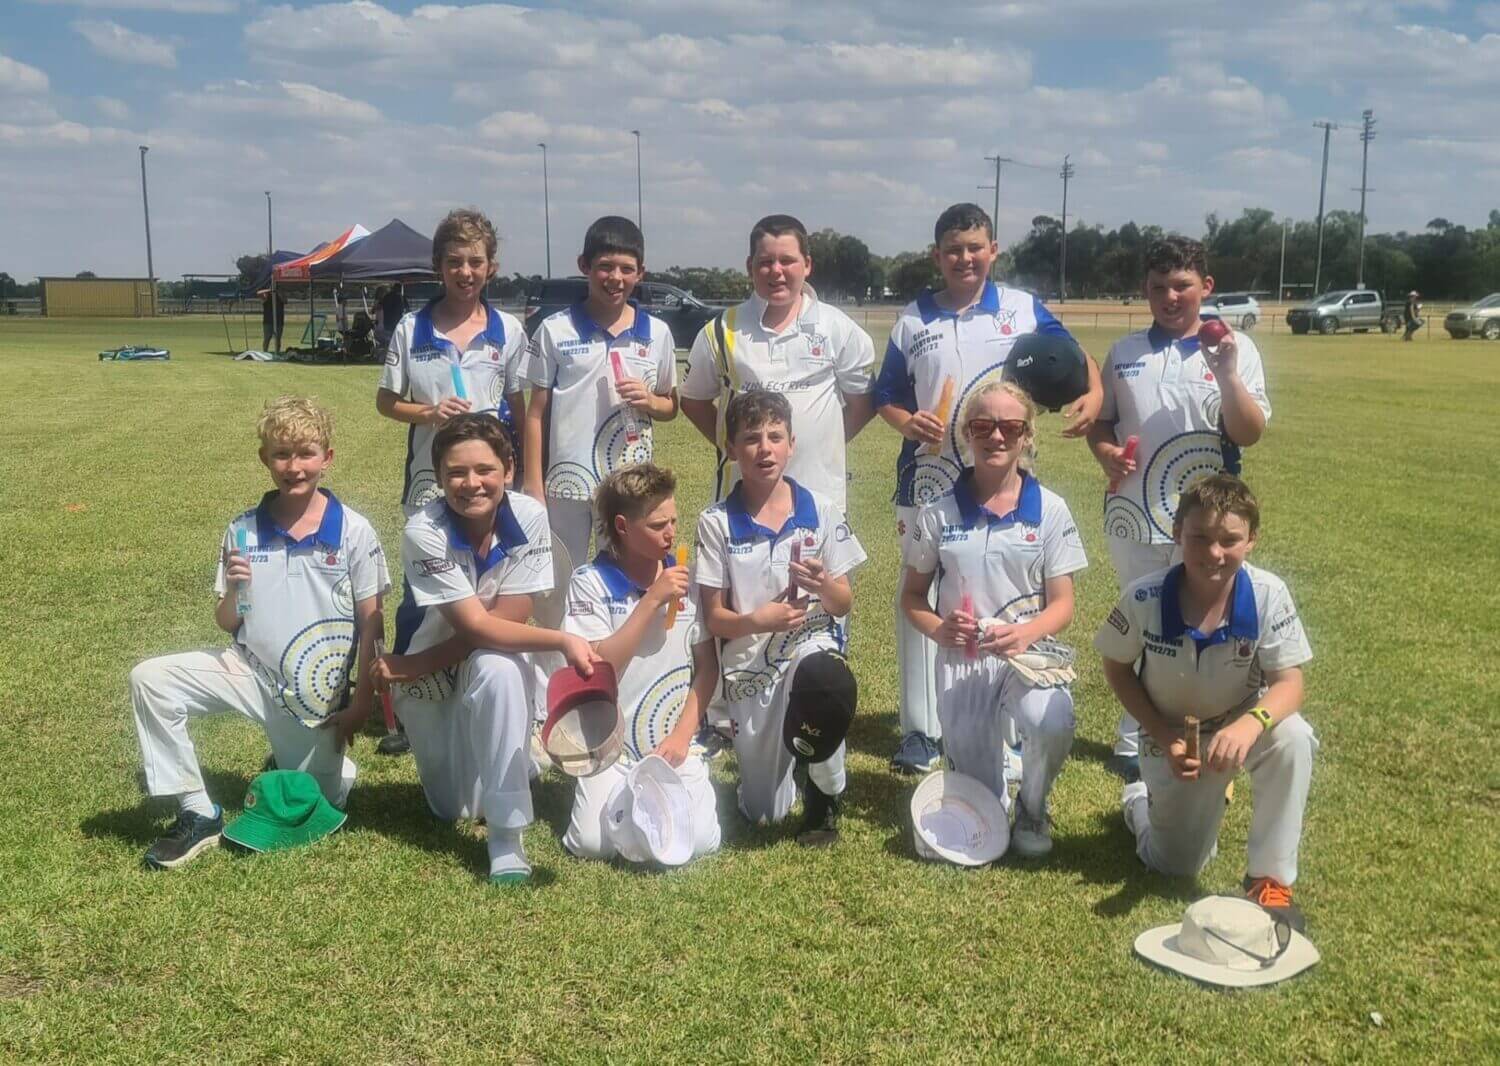 The Condobolin Under 12s Intertown team are off to the Lachlan Cricket Council Grand Final. It was a great day today for the Under 12s as they had a dominant win in their semi-final. They will play their Grand Final next Sunday. Image Credit: Condobolin Junior Cricket Association Facebook Page.